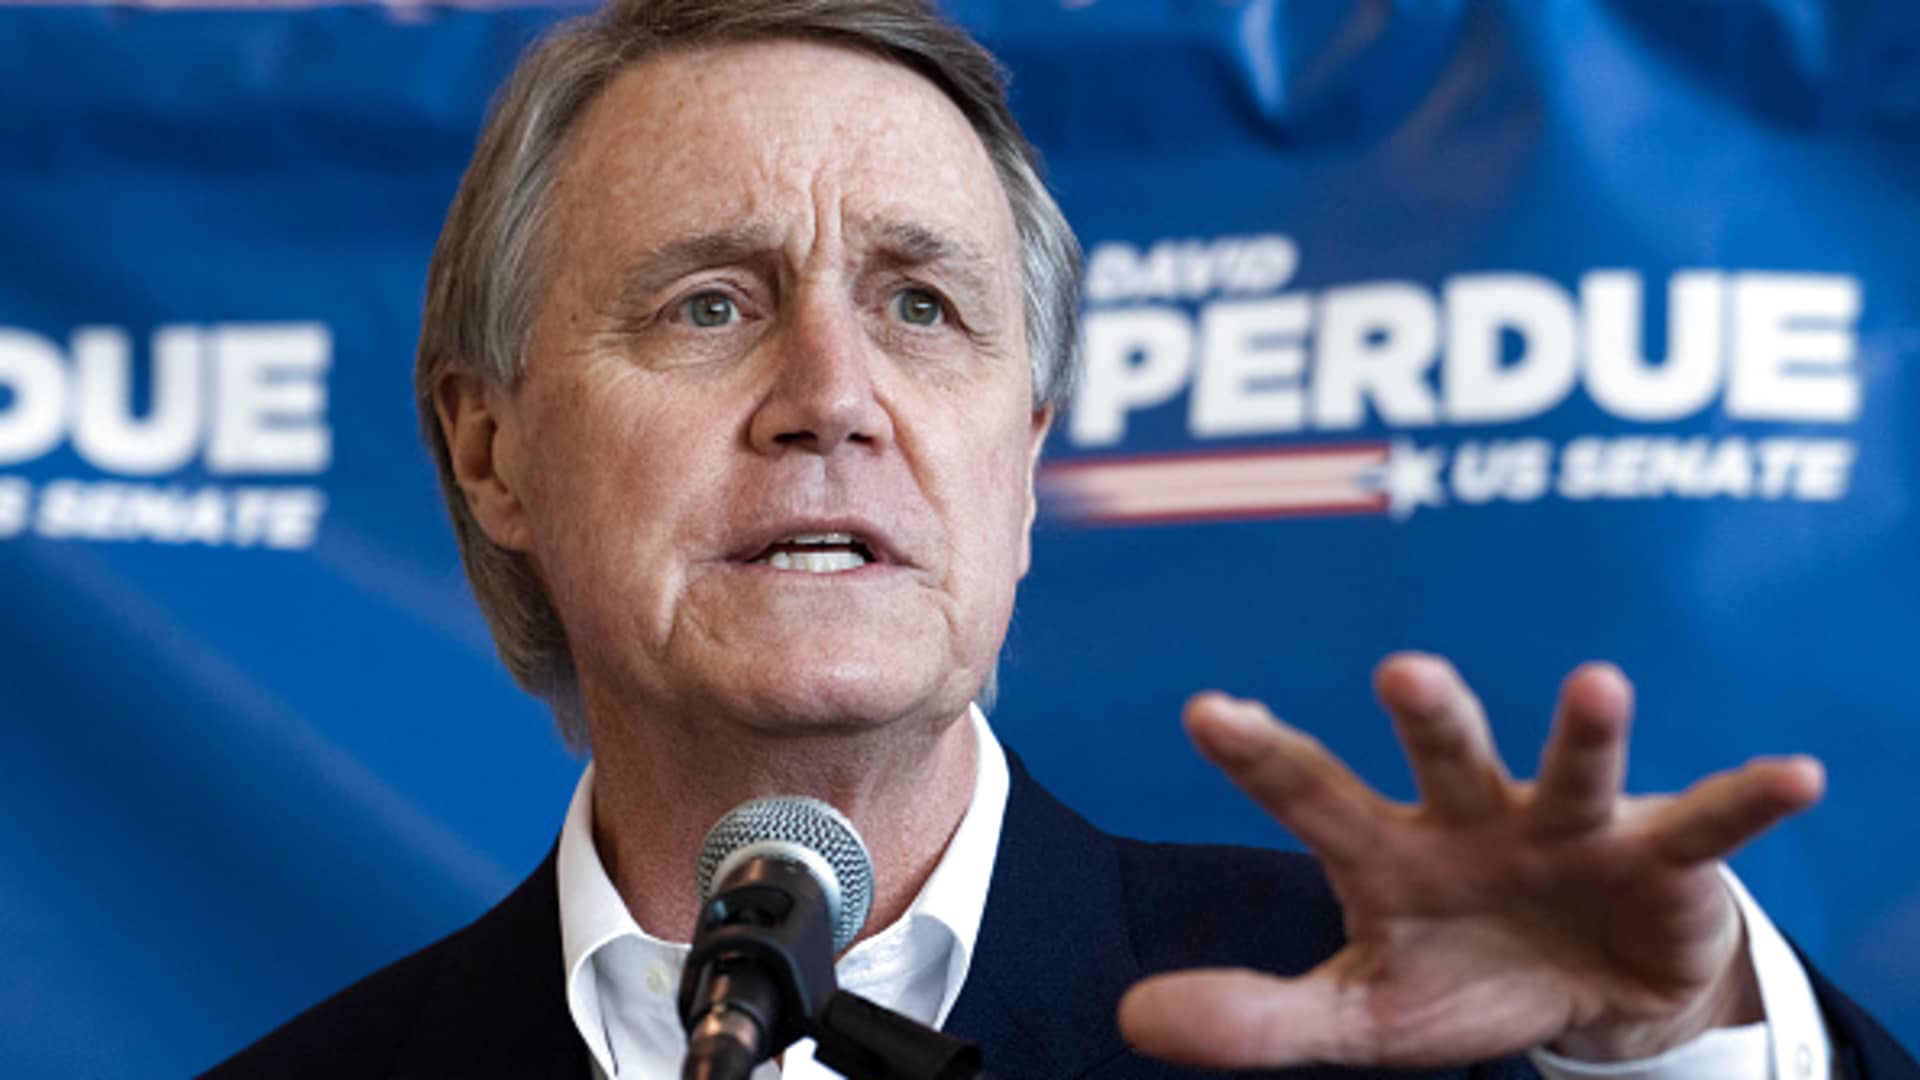 Sen. David Perdue, R-Ga., who is running for reelection, speaks during a campaign event at Peachtree Dekalb Airport in Atlanta, Ga., on Monday, November 2, 2020.